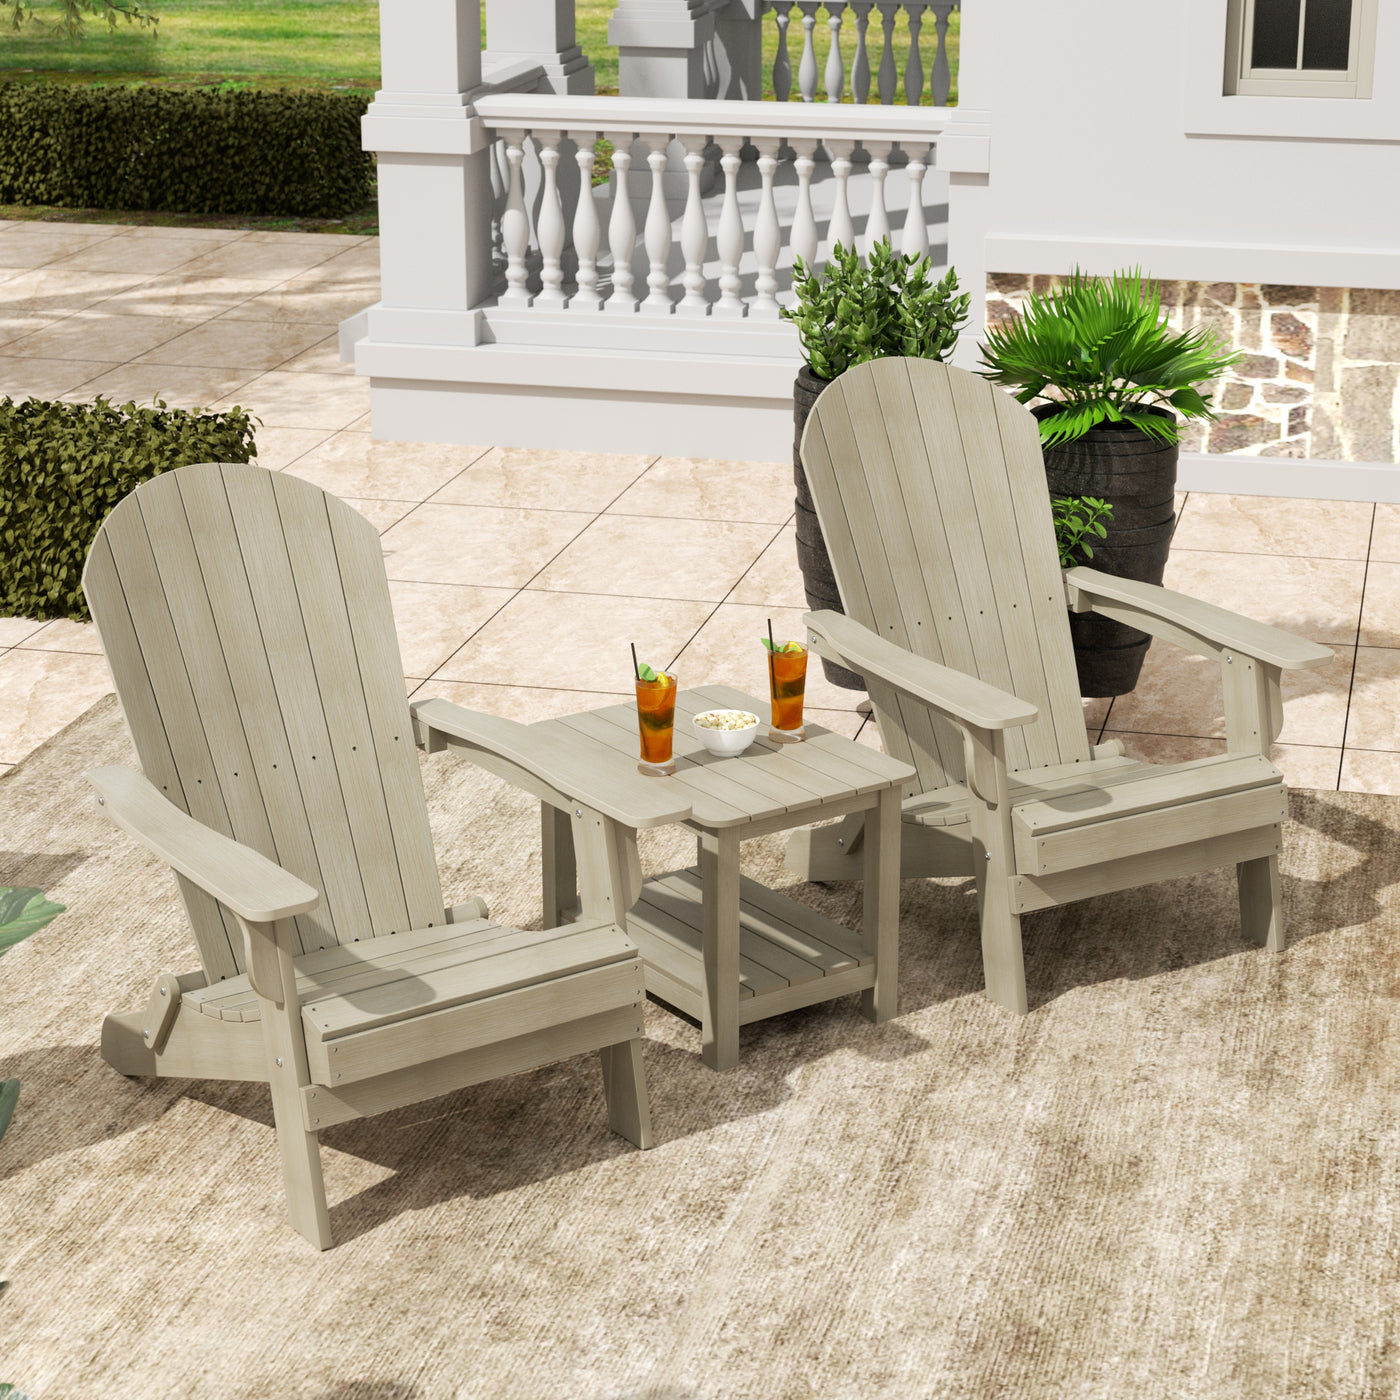 Tuscany HIPS 3-Piece Outdoor Folding Adirondack Chair With Side Table Set